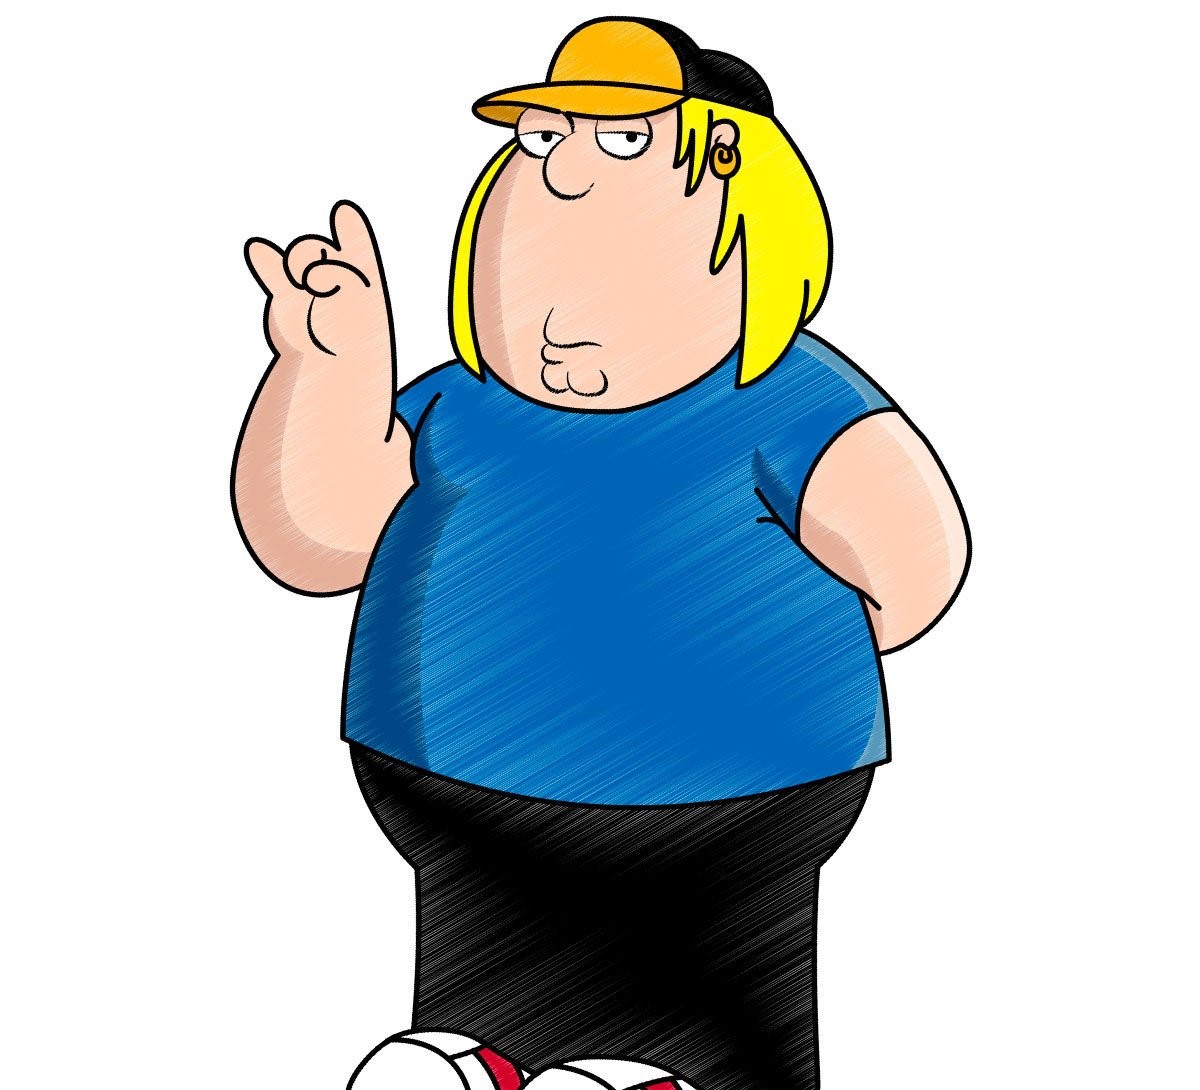 17-facts-about-chris-griffin-family-guy